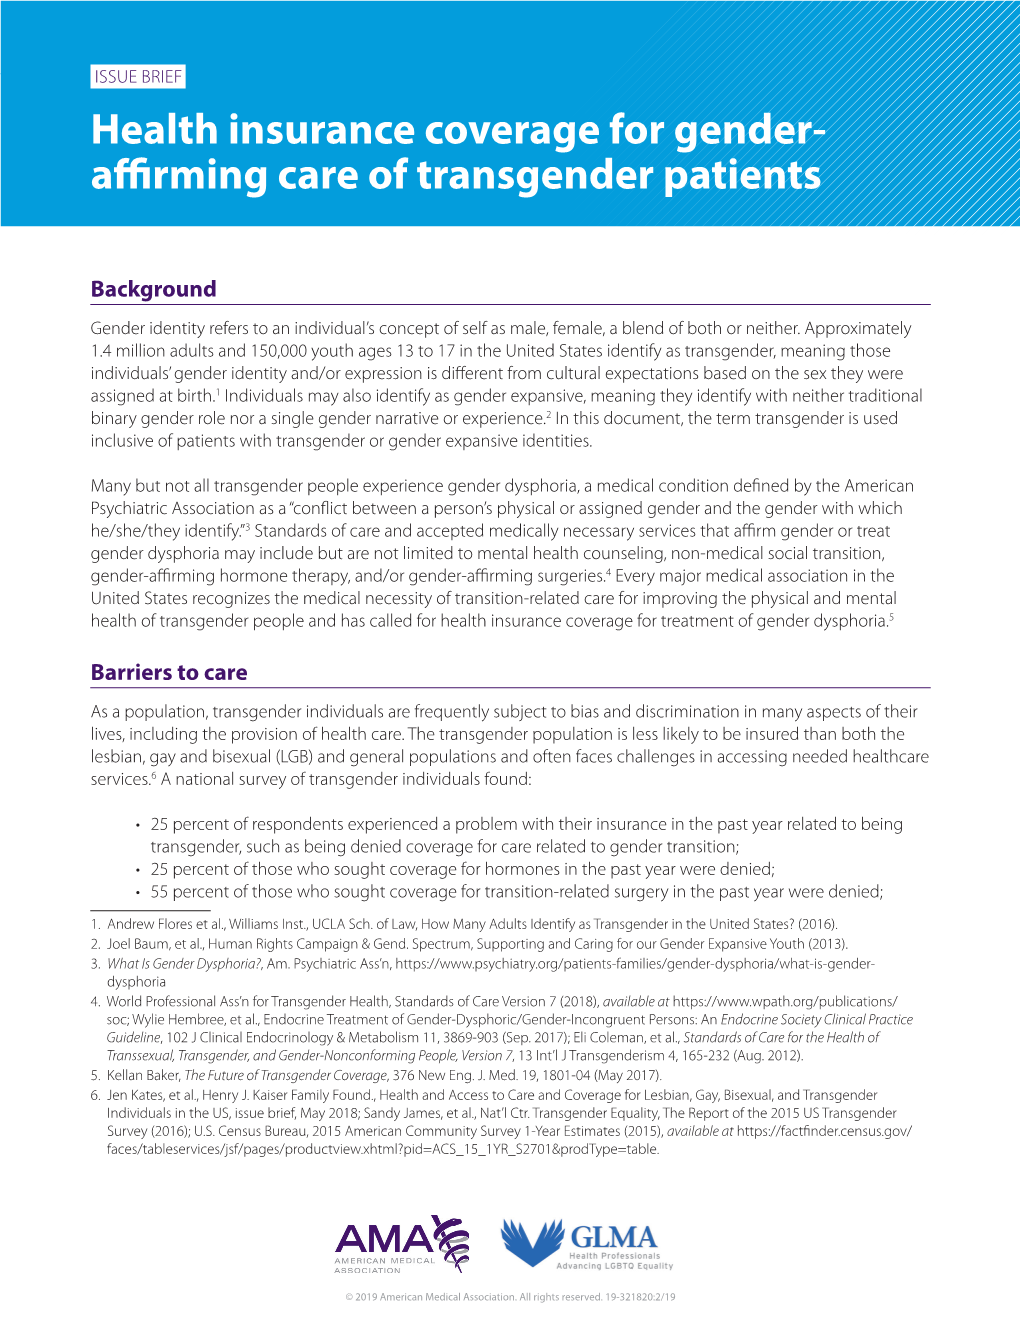 Issue Brief: Health Insurance Coverage for Gender-Affirming Care Of